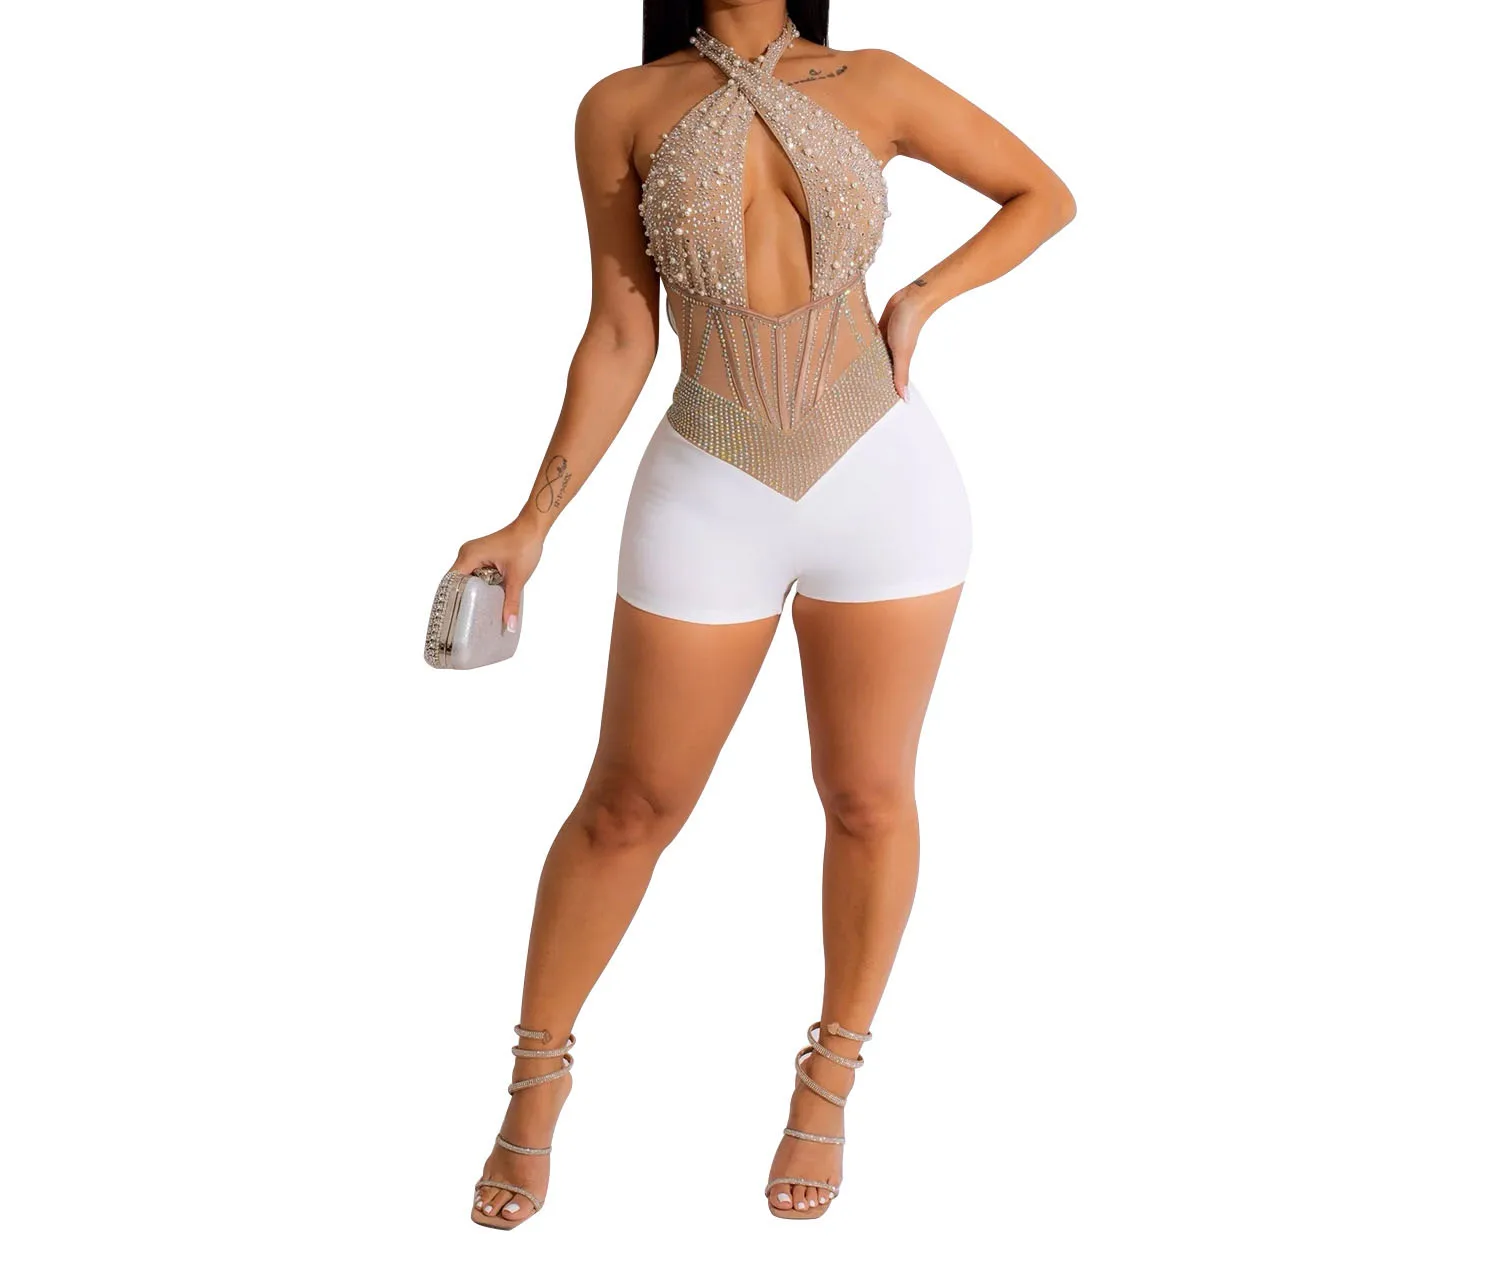 Jumpsuit for Women Fashion Mesh Beaded Hanging Neck Sexy Sleeveless One-piece Shorts